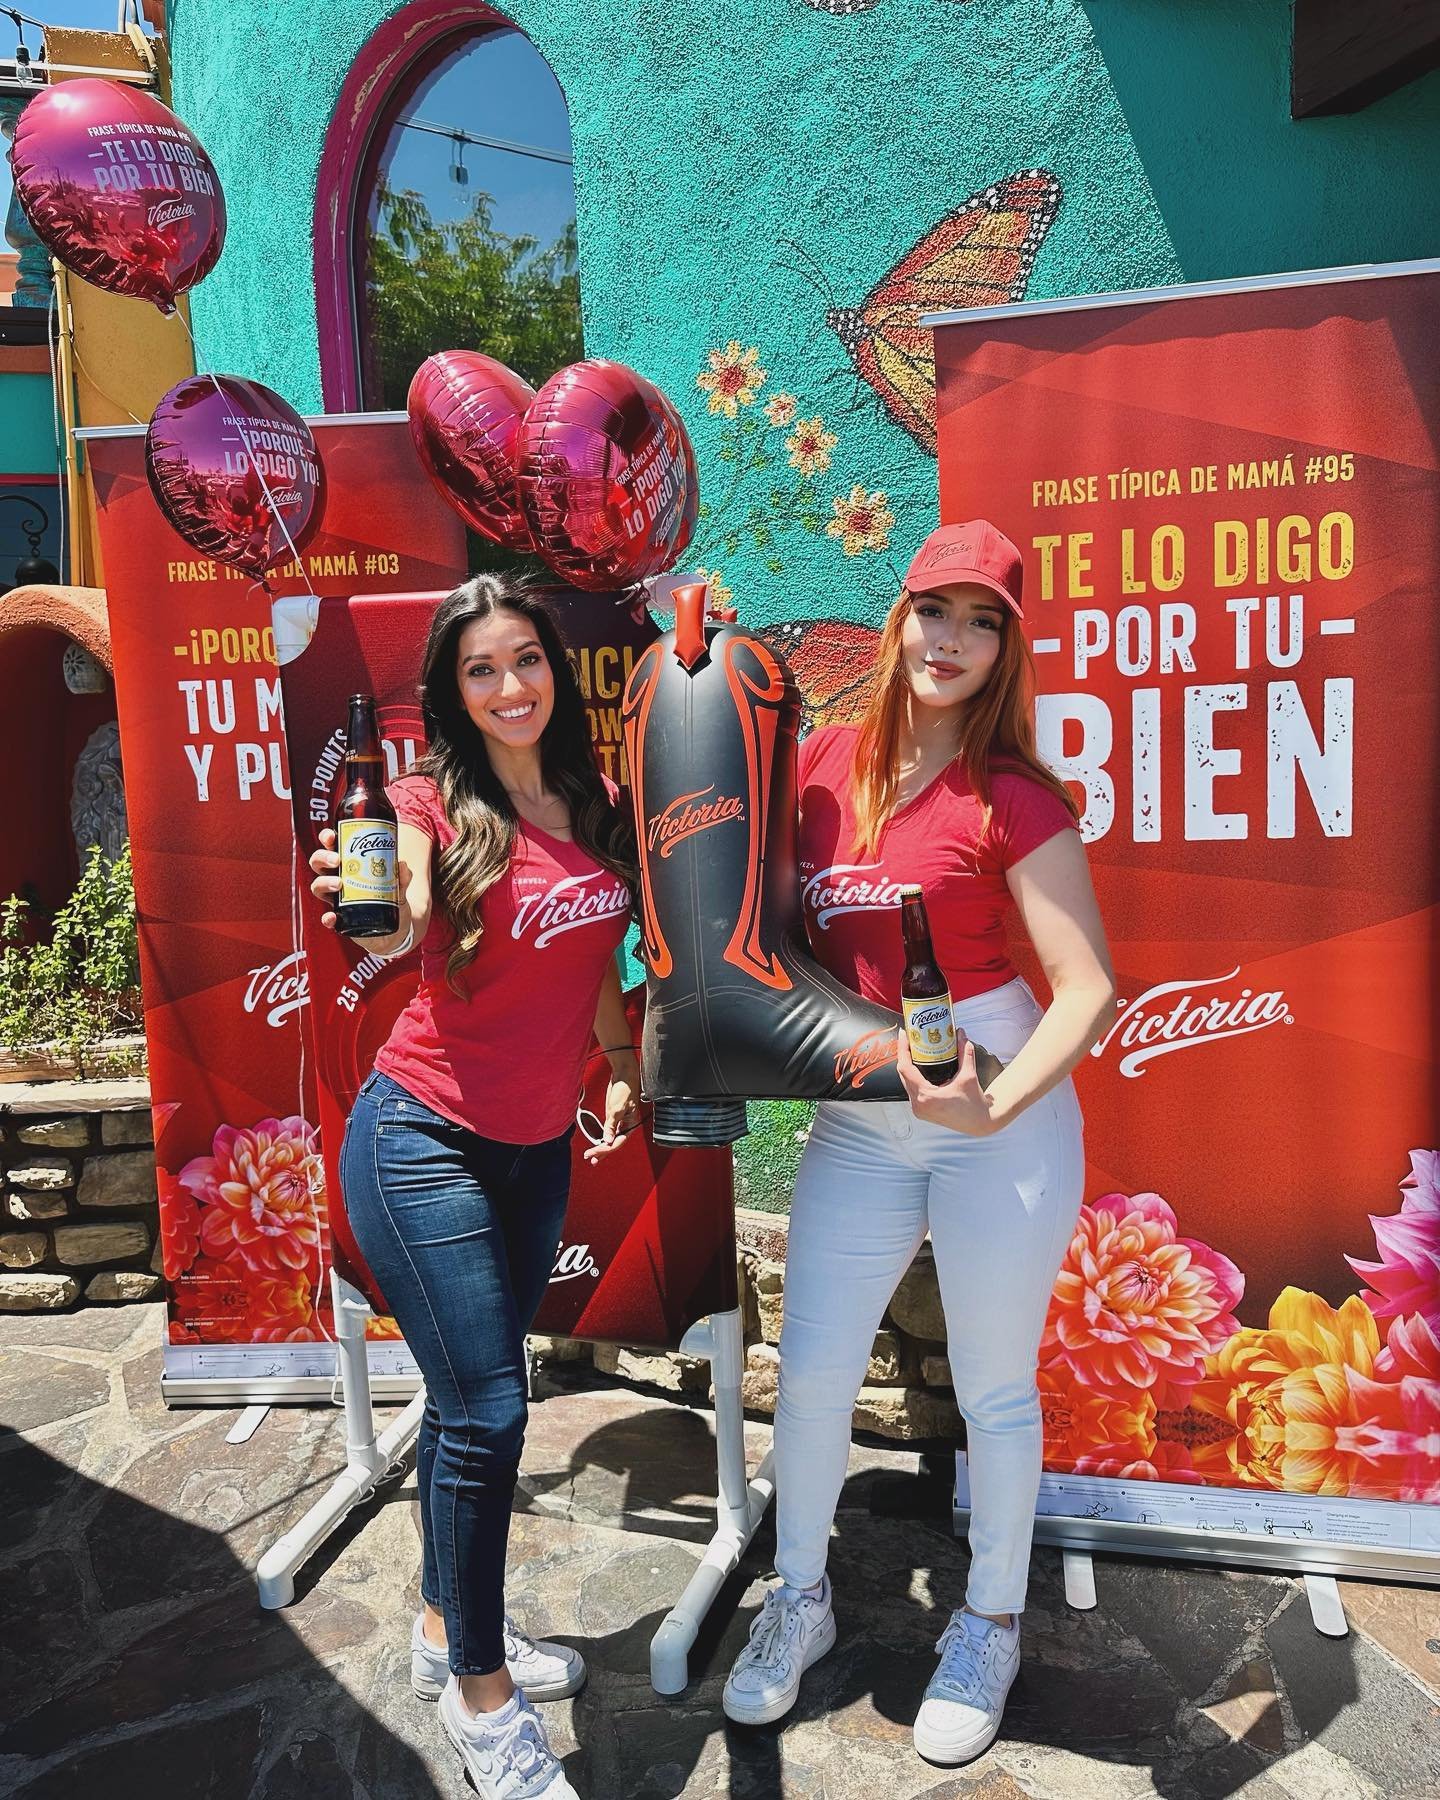 Cheers to the best! 🍻 Celebrating Mother&rsquo;s Day weekend with Victoria Beer 
📍Las Vegas, NV
.
.
.
 #VictoriaBeer #MothersDayCelebration #PromoModels #blossomtalent #chanclathrowingcontest